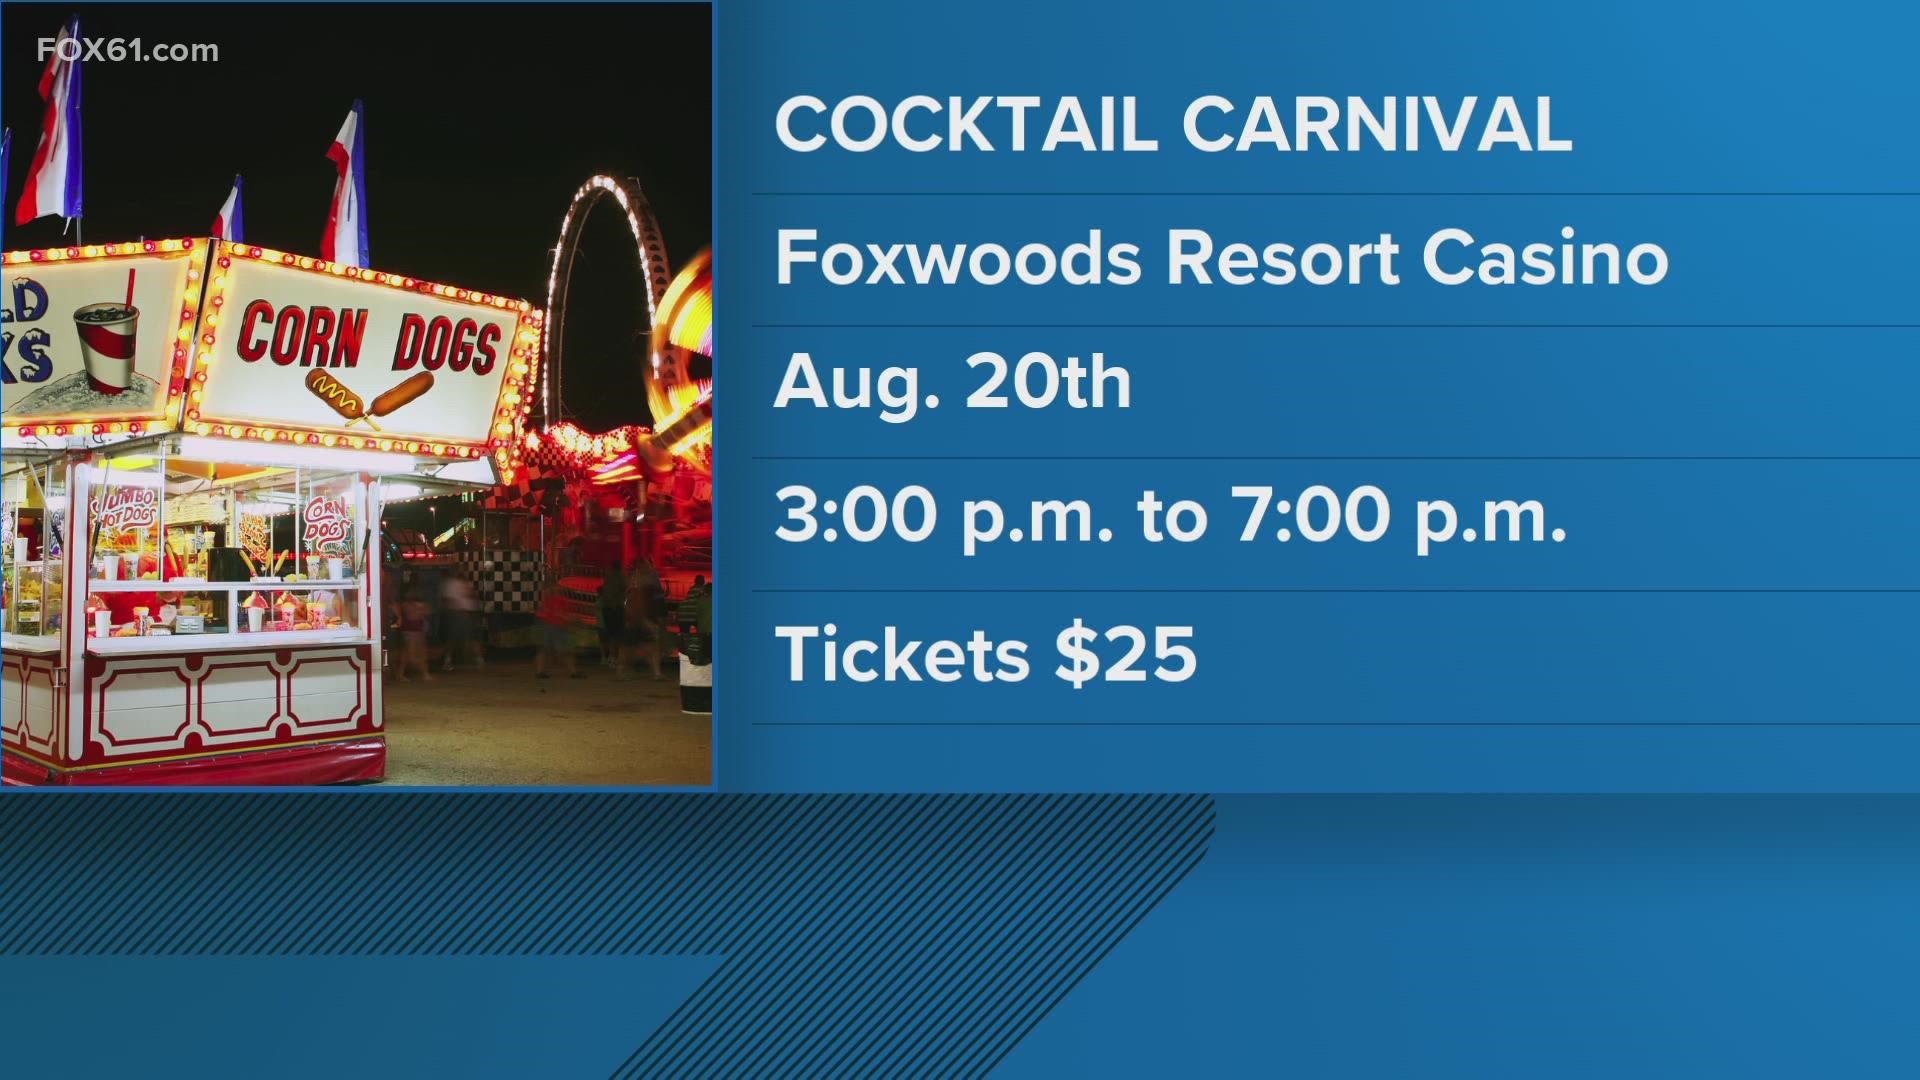 Foxwoods Resort Casino will be holding their Cocktail Carnival on August 20 from 3 p.m. to 7 p.m. where you can enjoy carnival games and food as well!